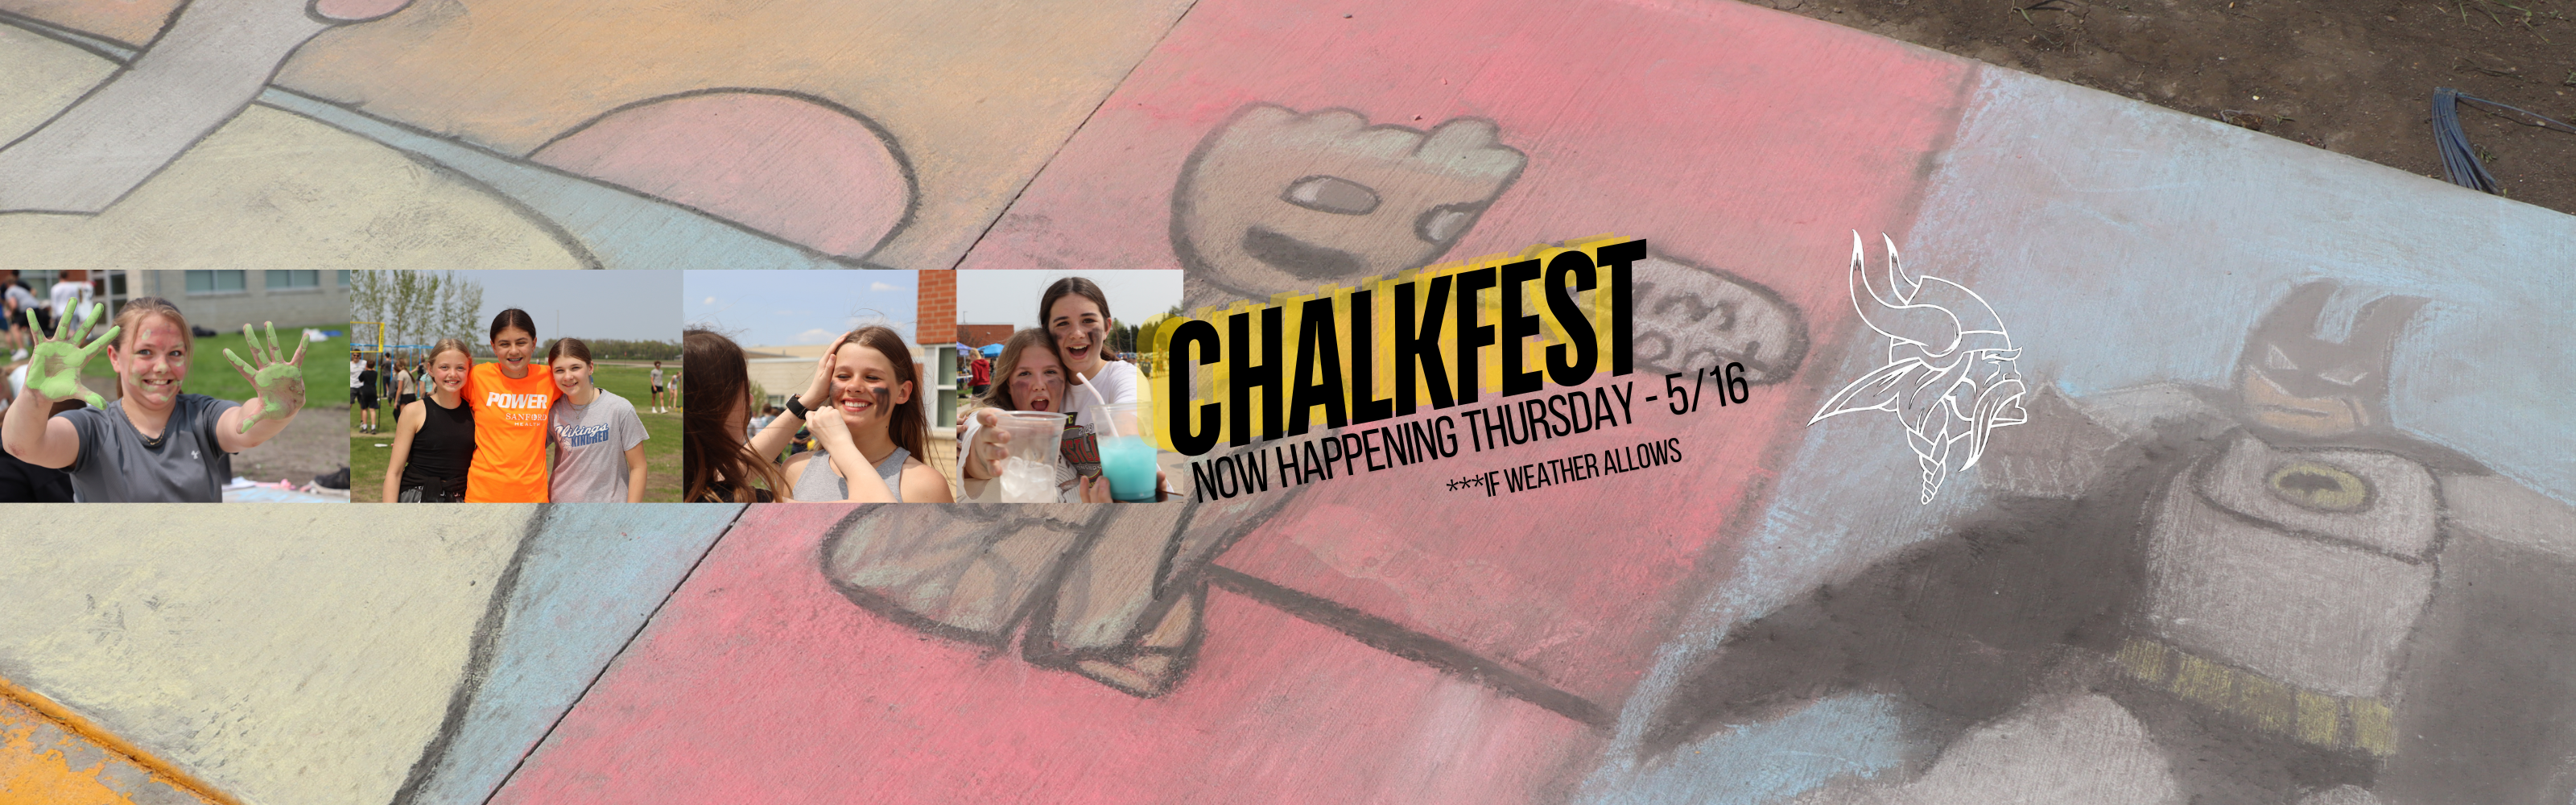 Chalkfest Moved